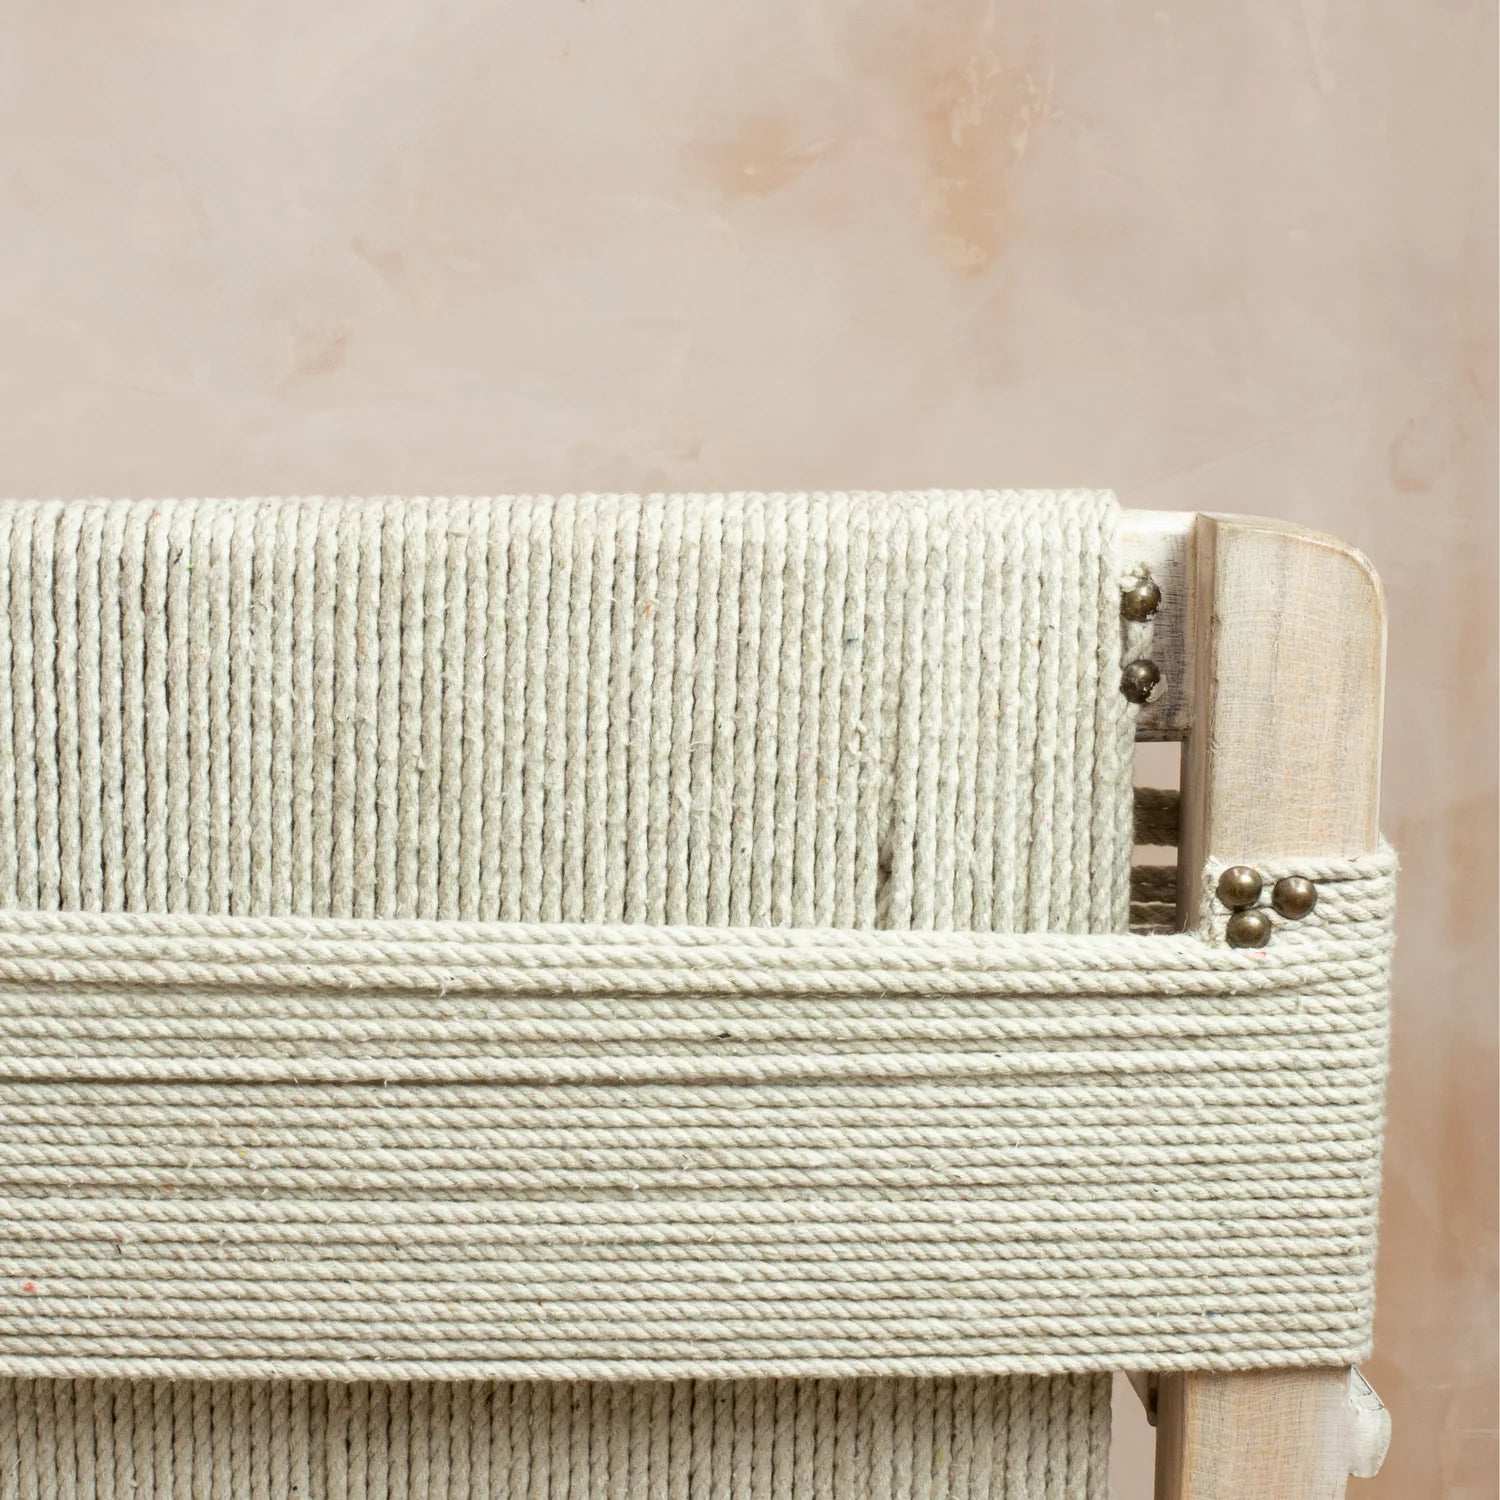 The string rope detailing  on the back of the Lulworth Rustic Wooden Armchair.